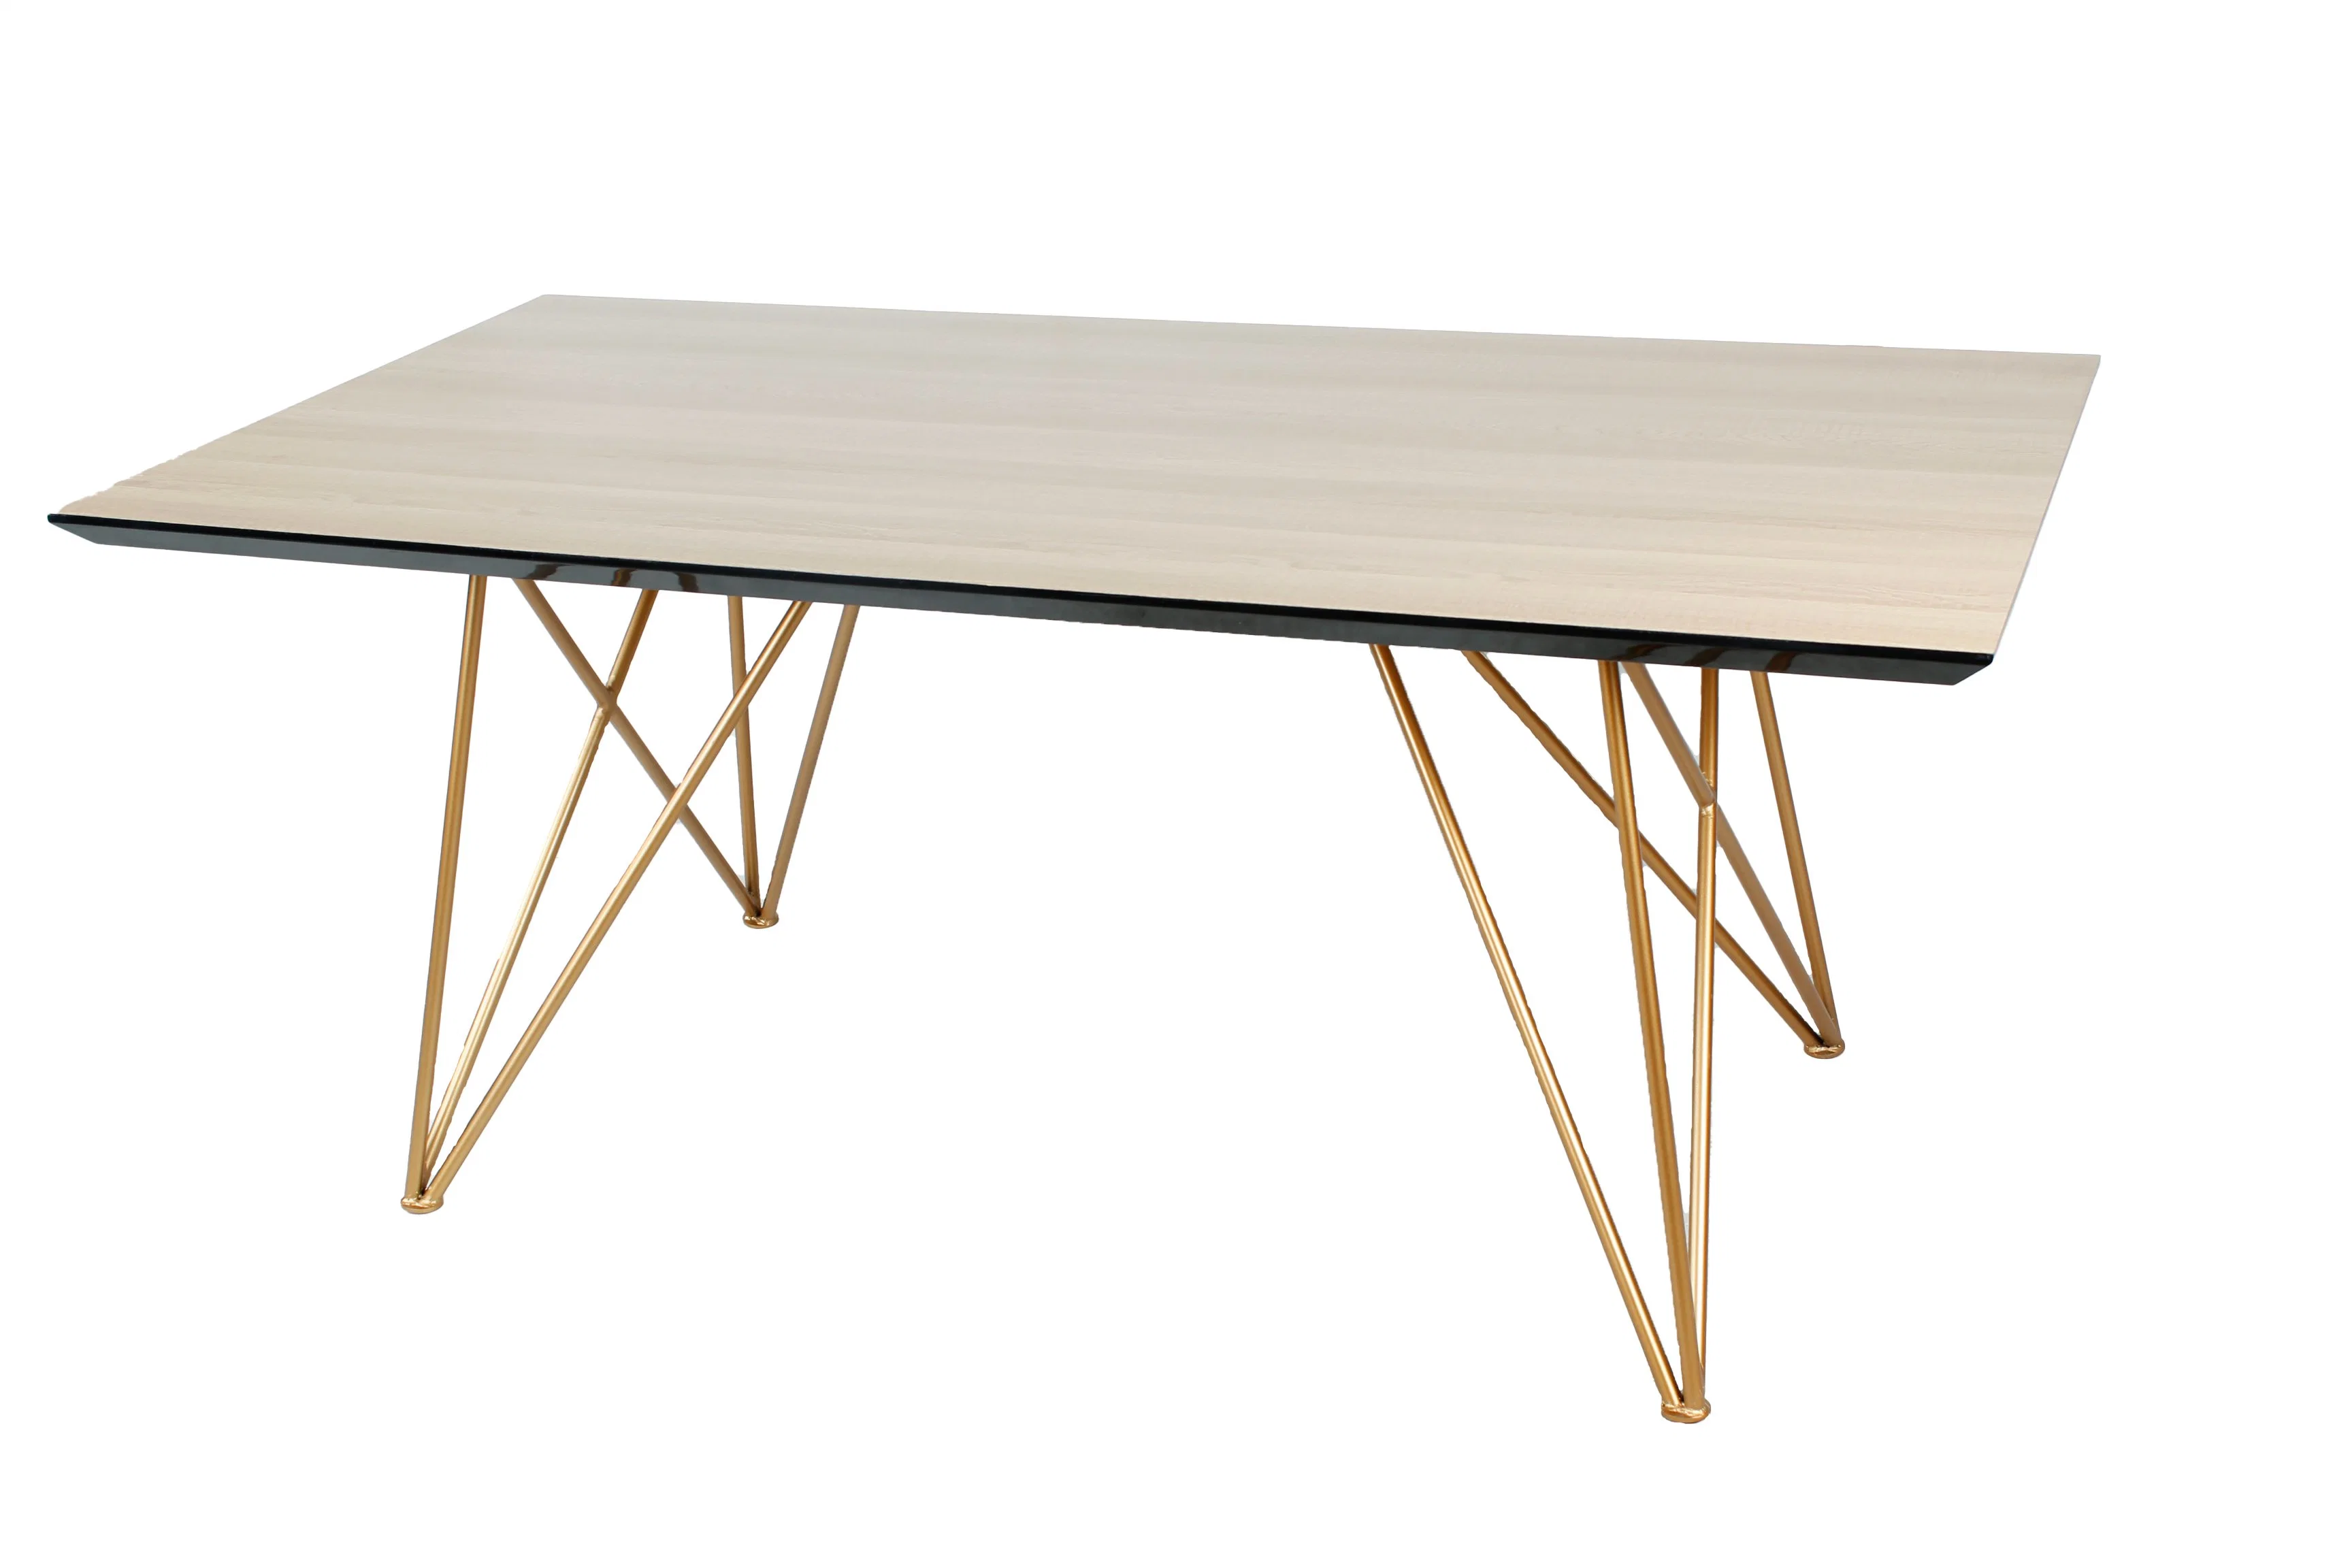 Modern Home Office Restaurant Furniture Table Sets Stainless Steel Golden Color Wooden Dining Table with MDF Table Top